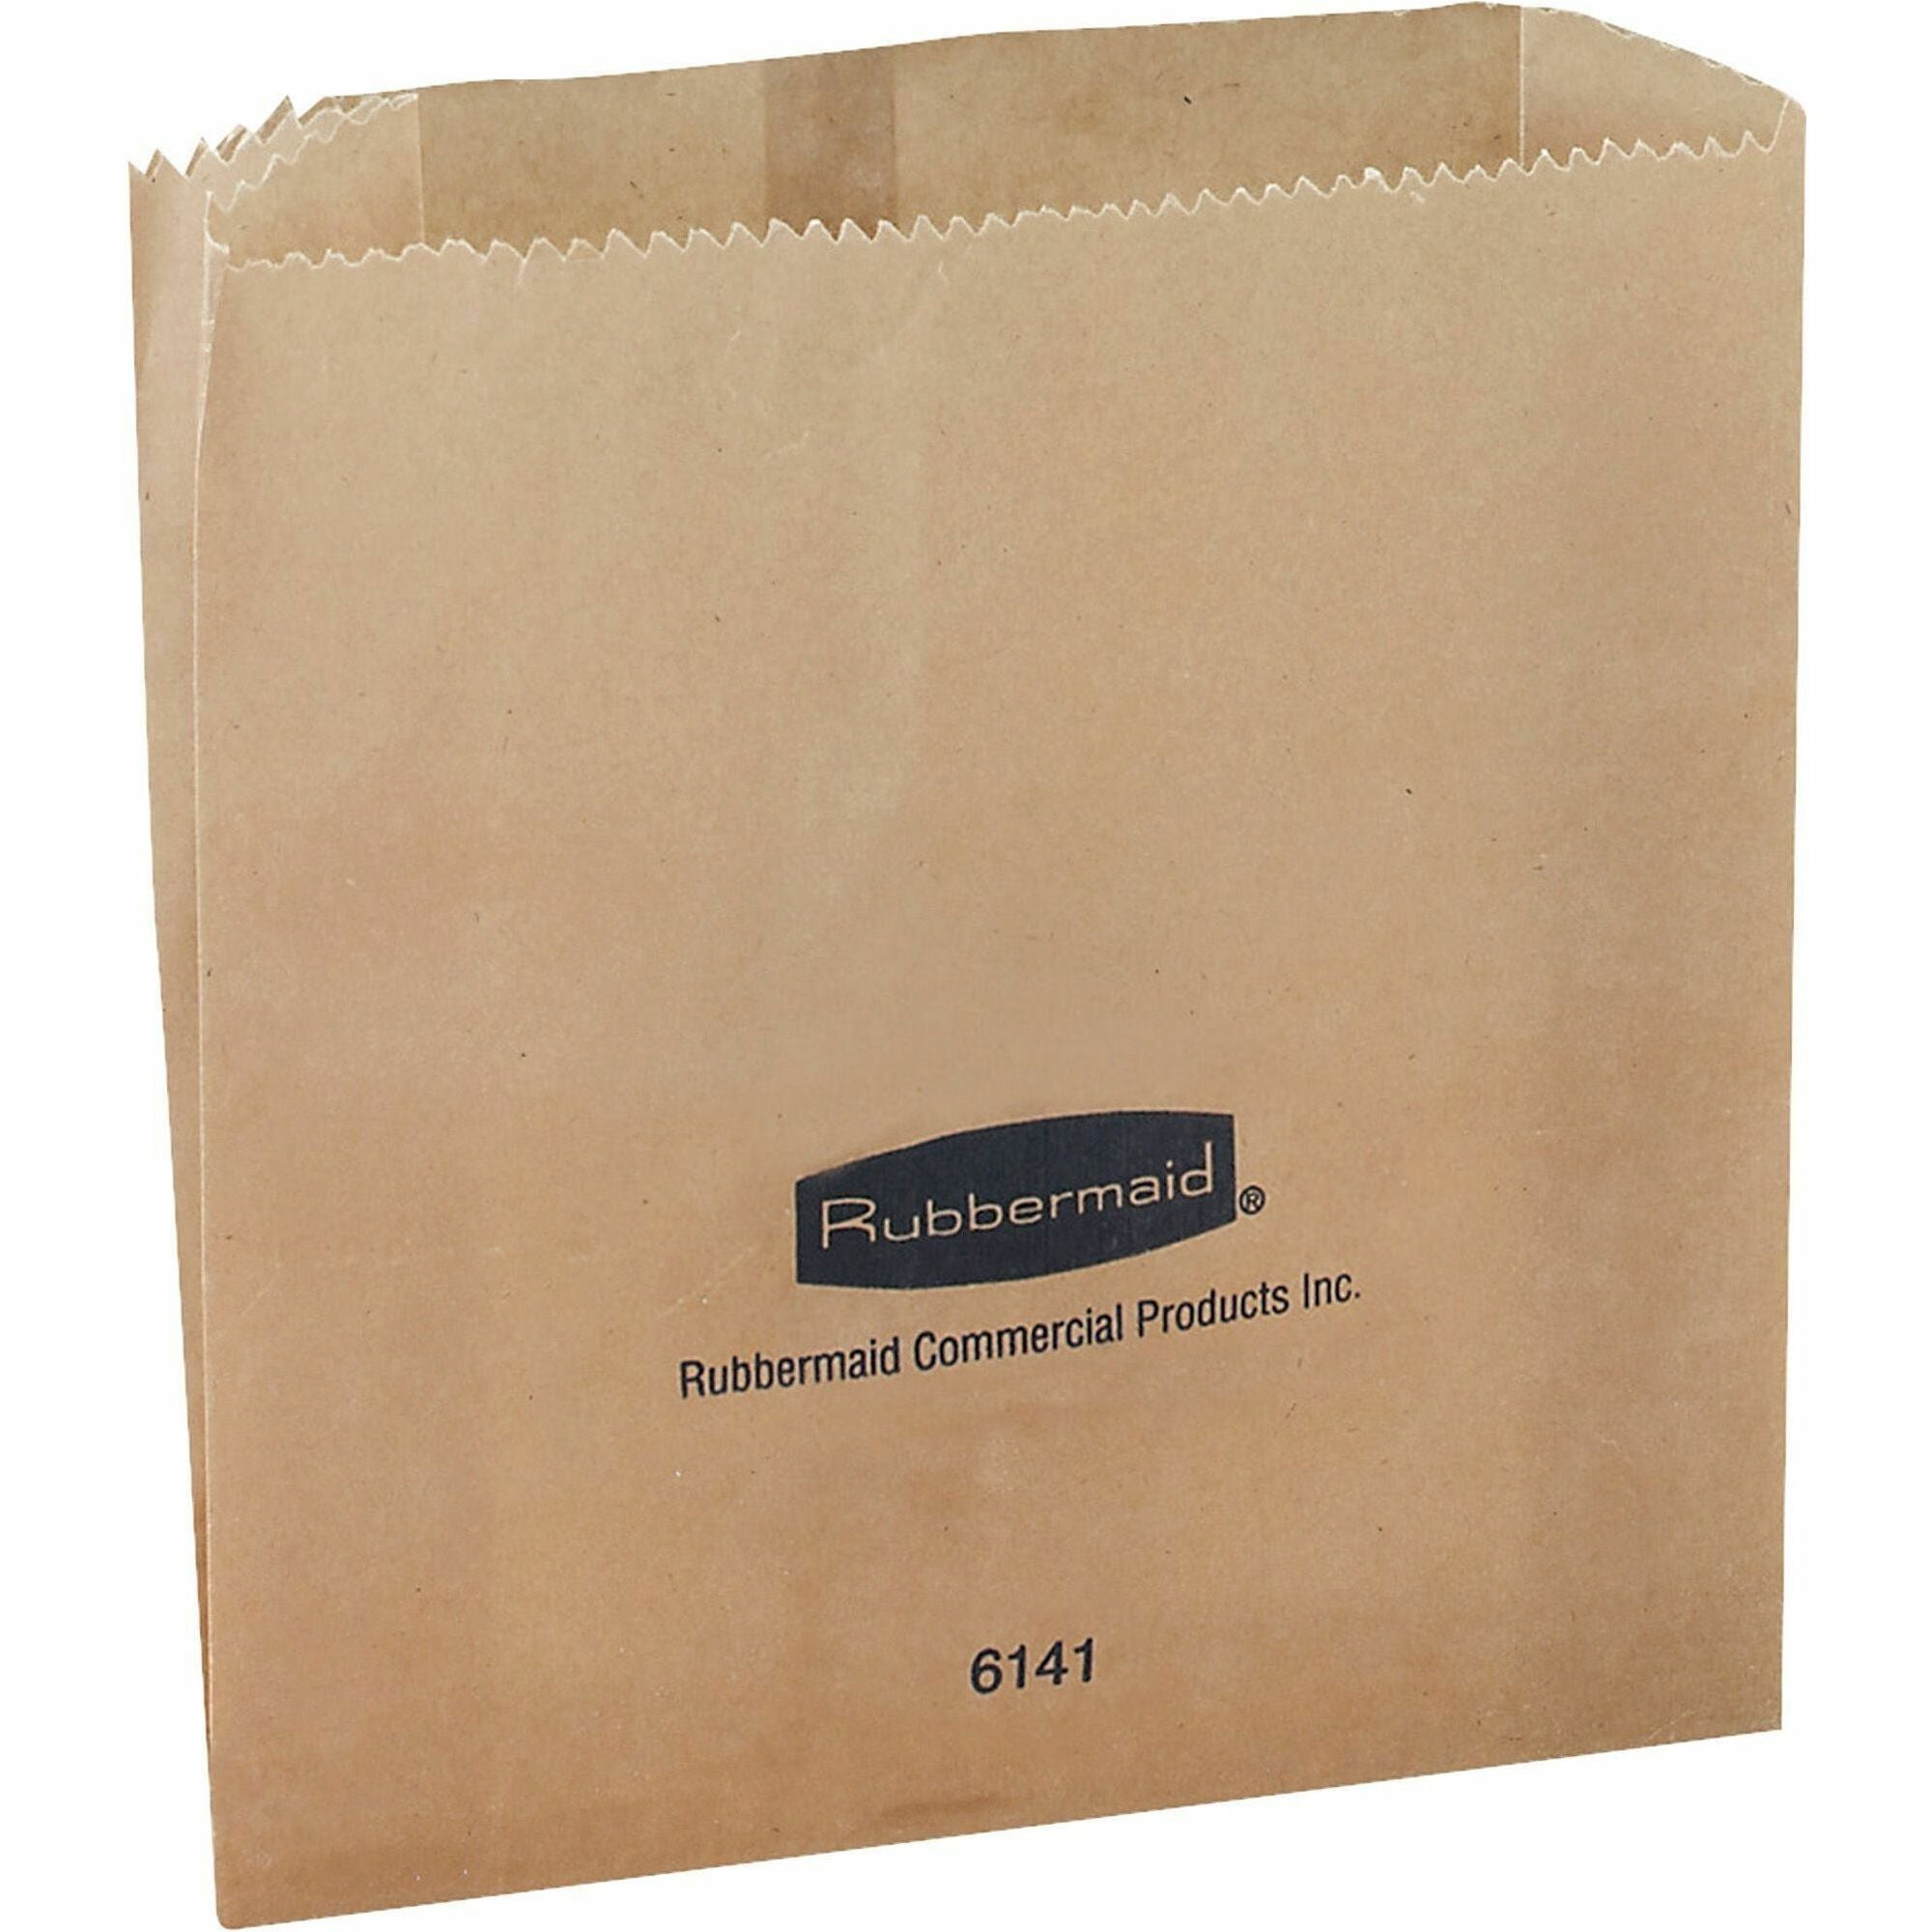 Rubbermaid Commercial Waxed Receptacle Bags - Kraft Paper - 250/Carton - 